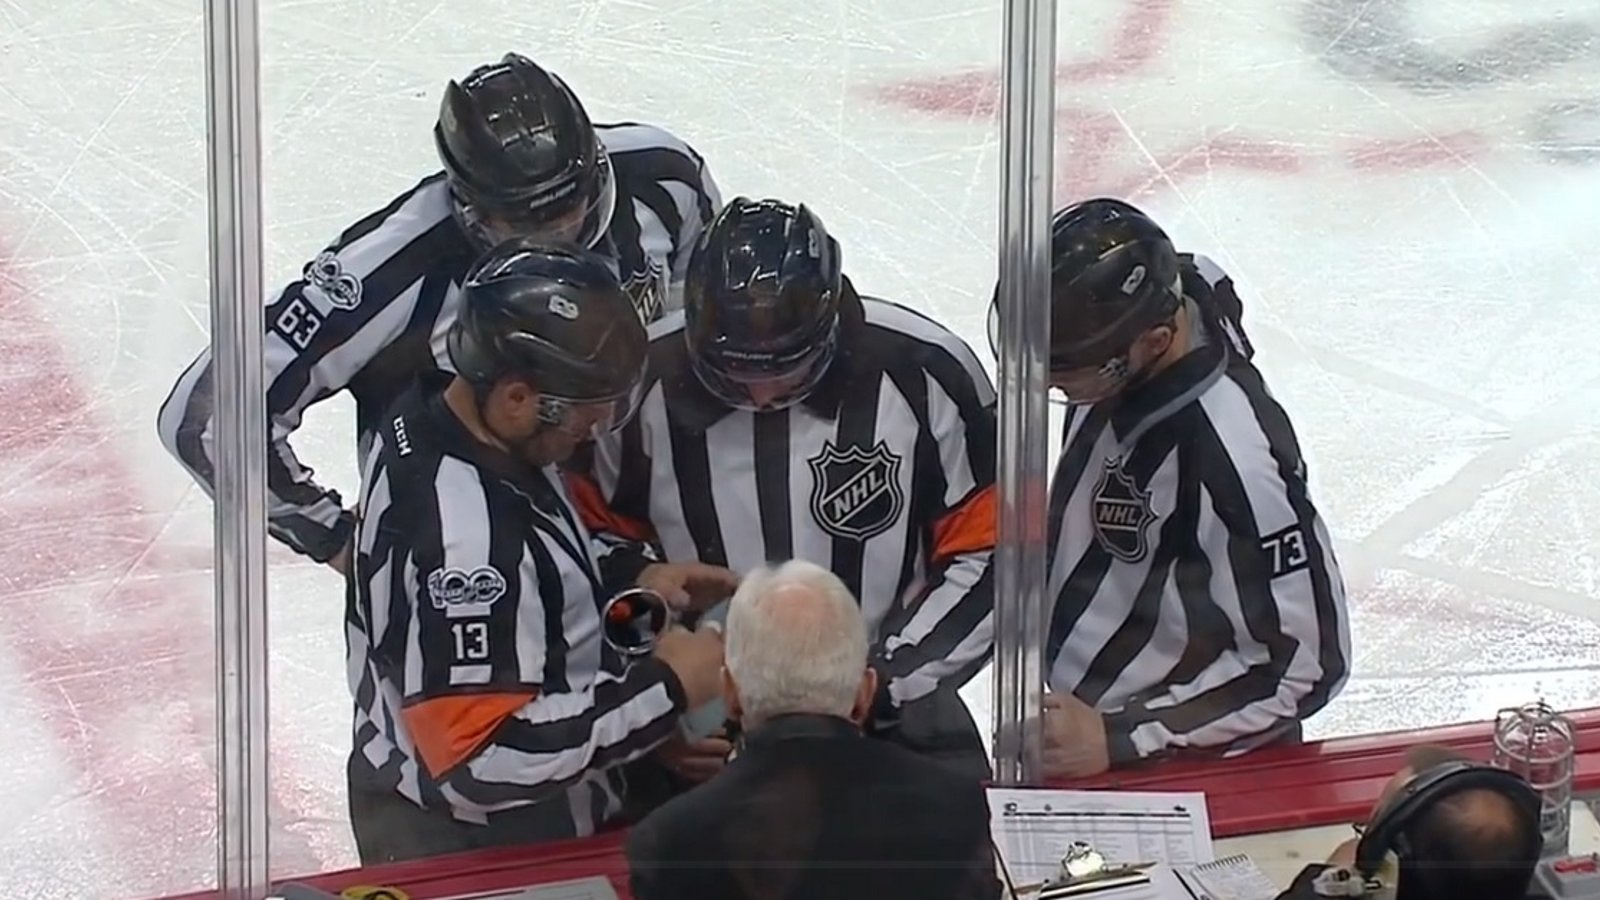 Officials for Game 5 revealed after controversy in Game 4.